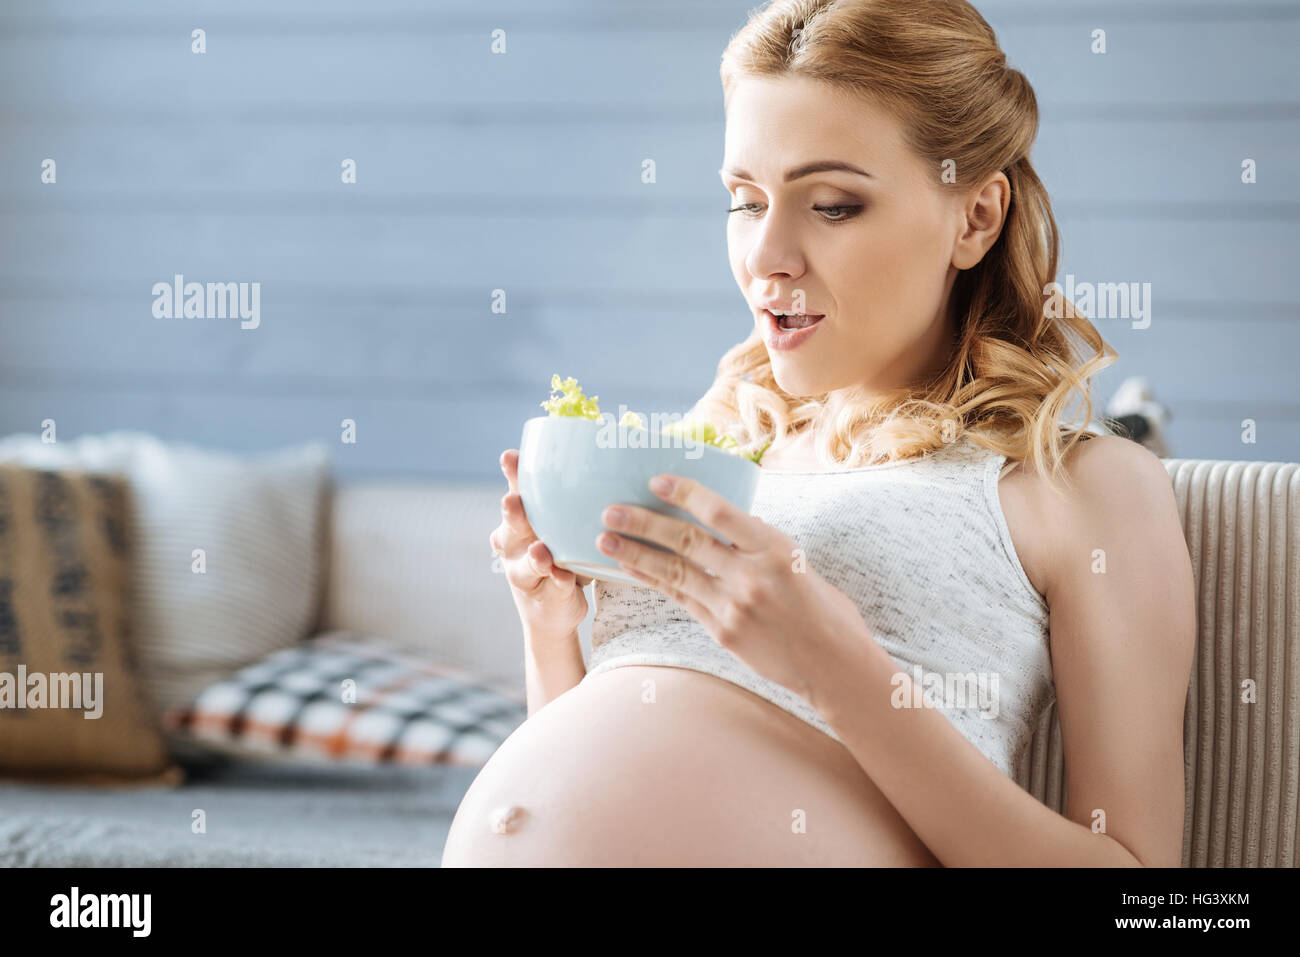 Pregnant woman holding a plate with salad Stock Photo